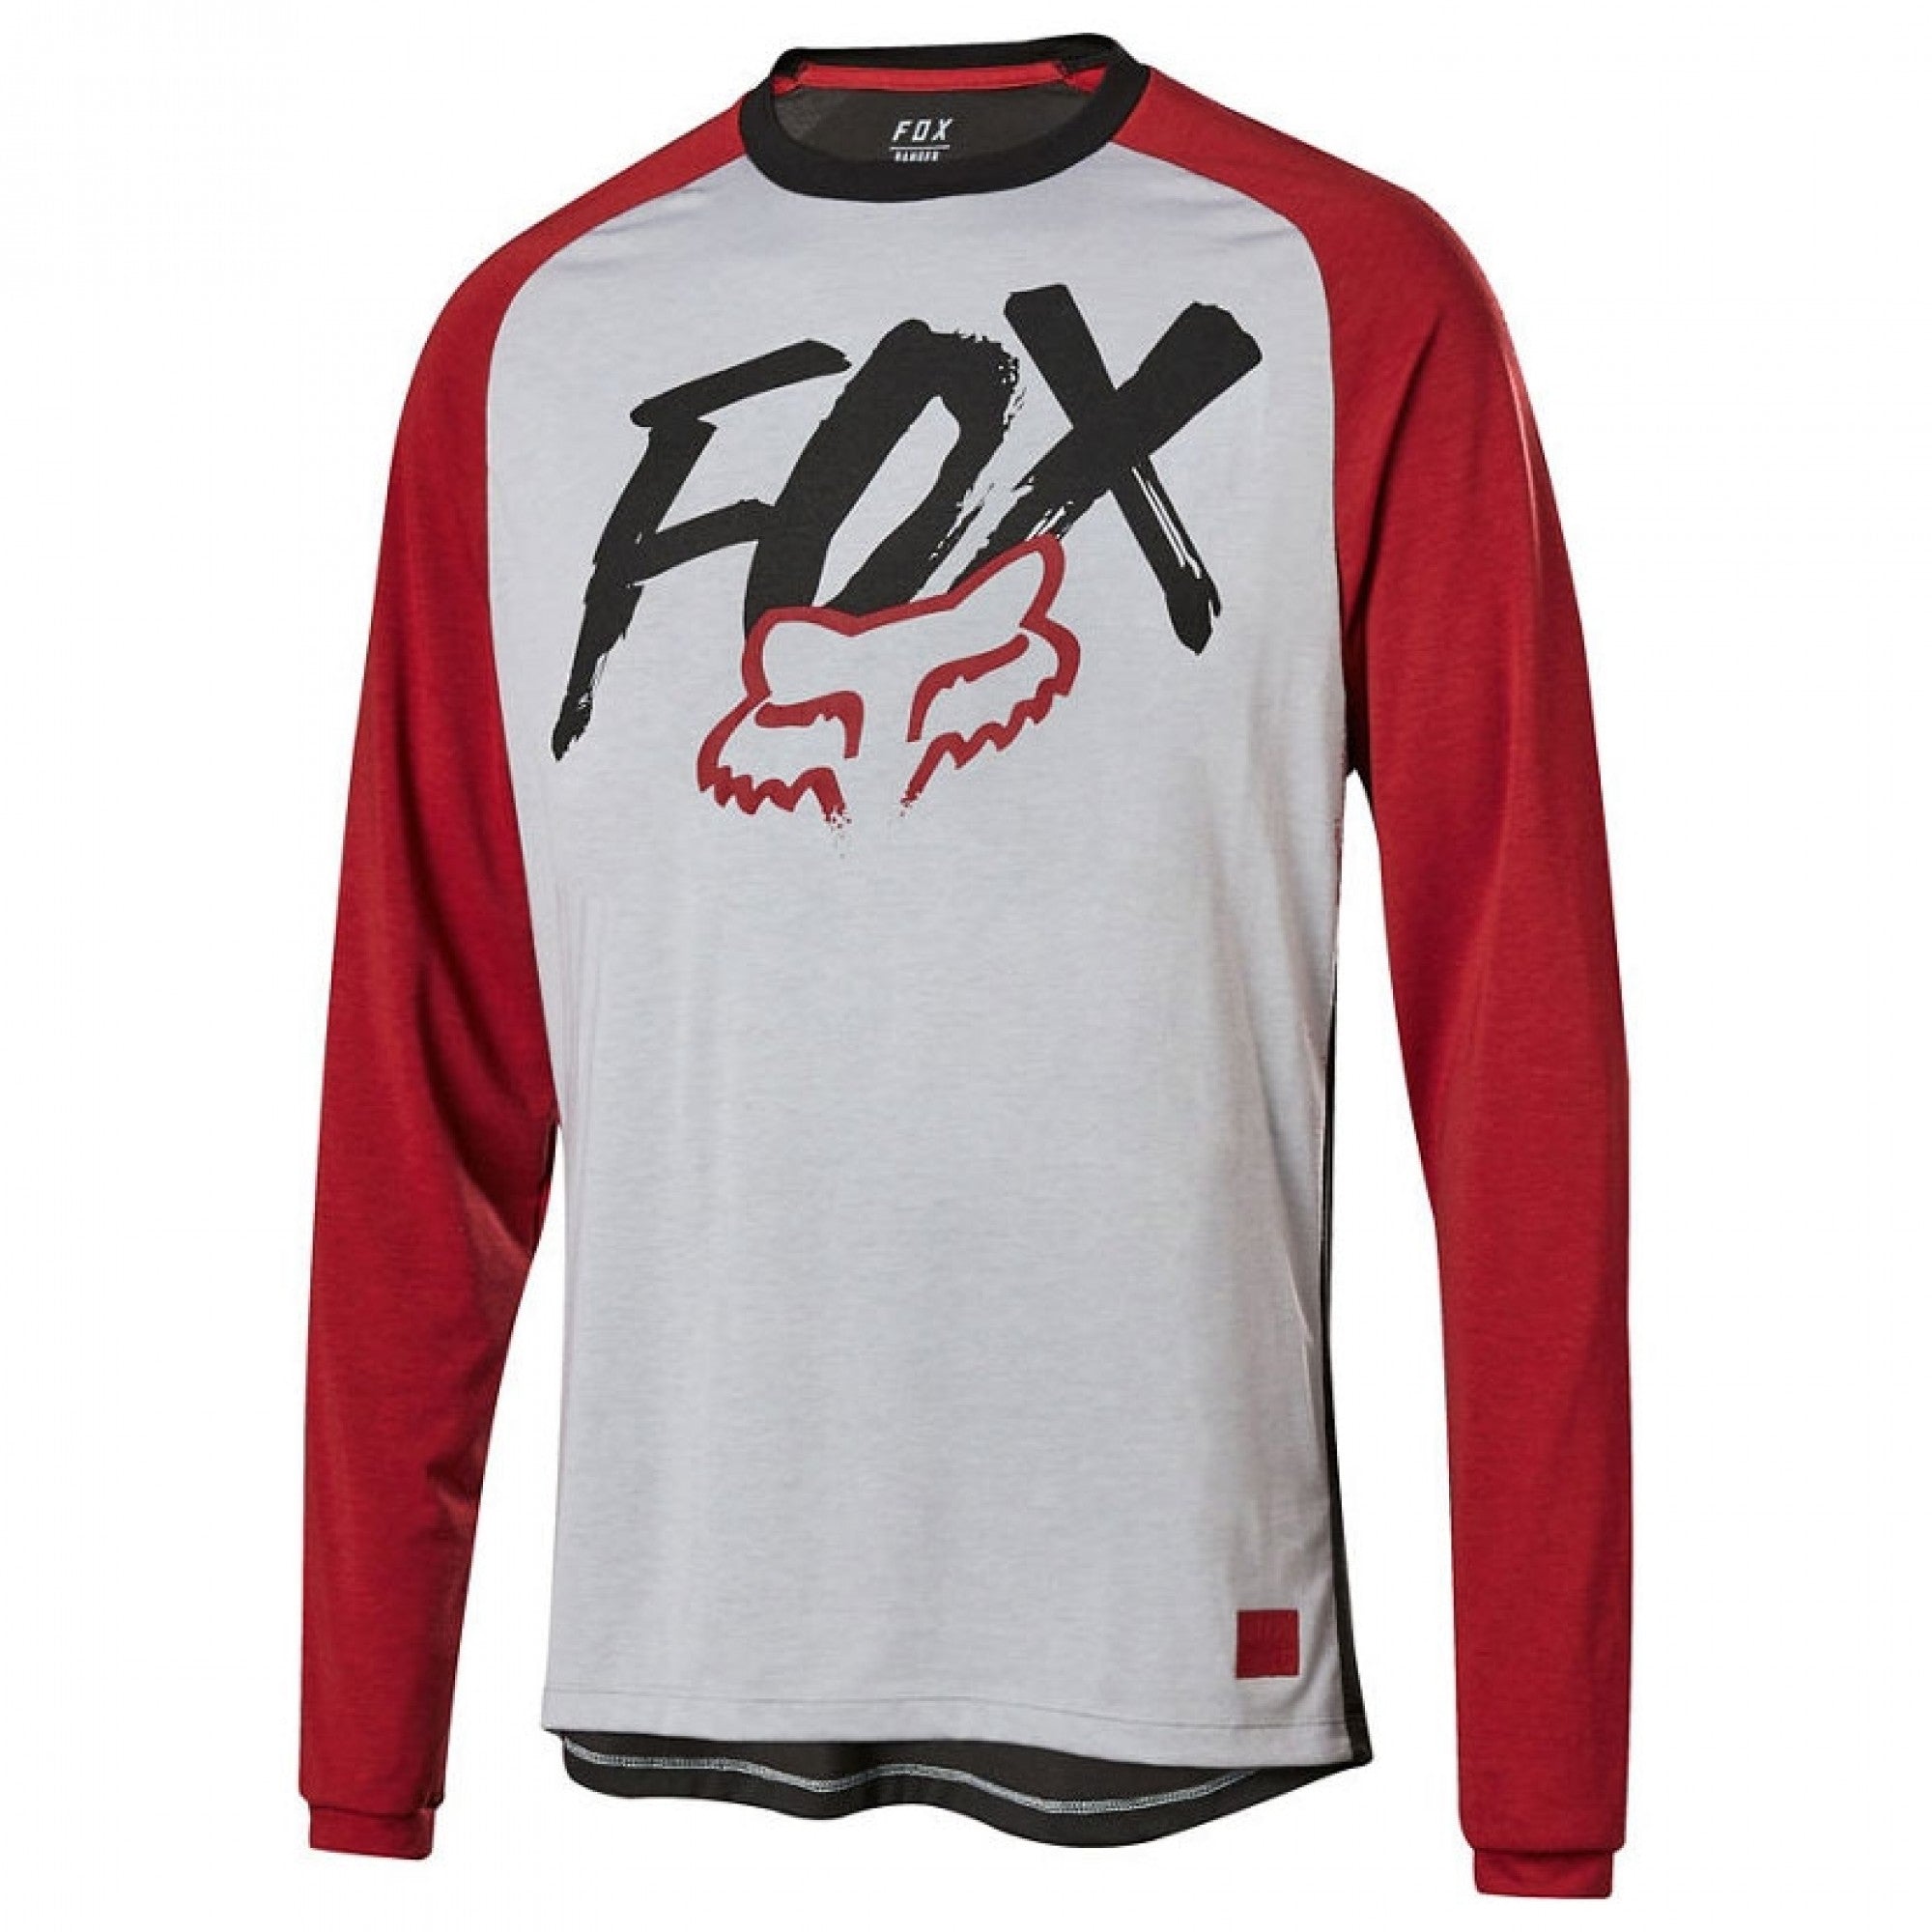 Fox | Mountain Bike Clothing, Gear & Armor | Bicycle Superstore